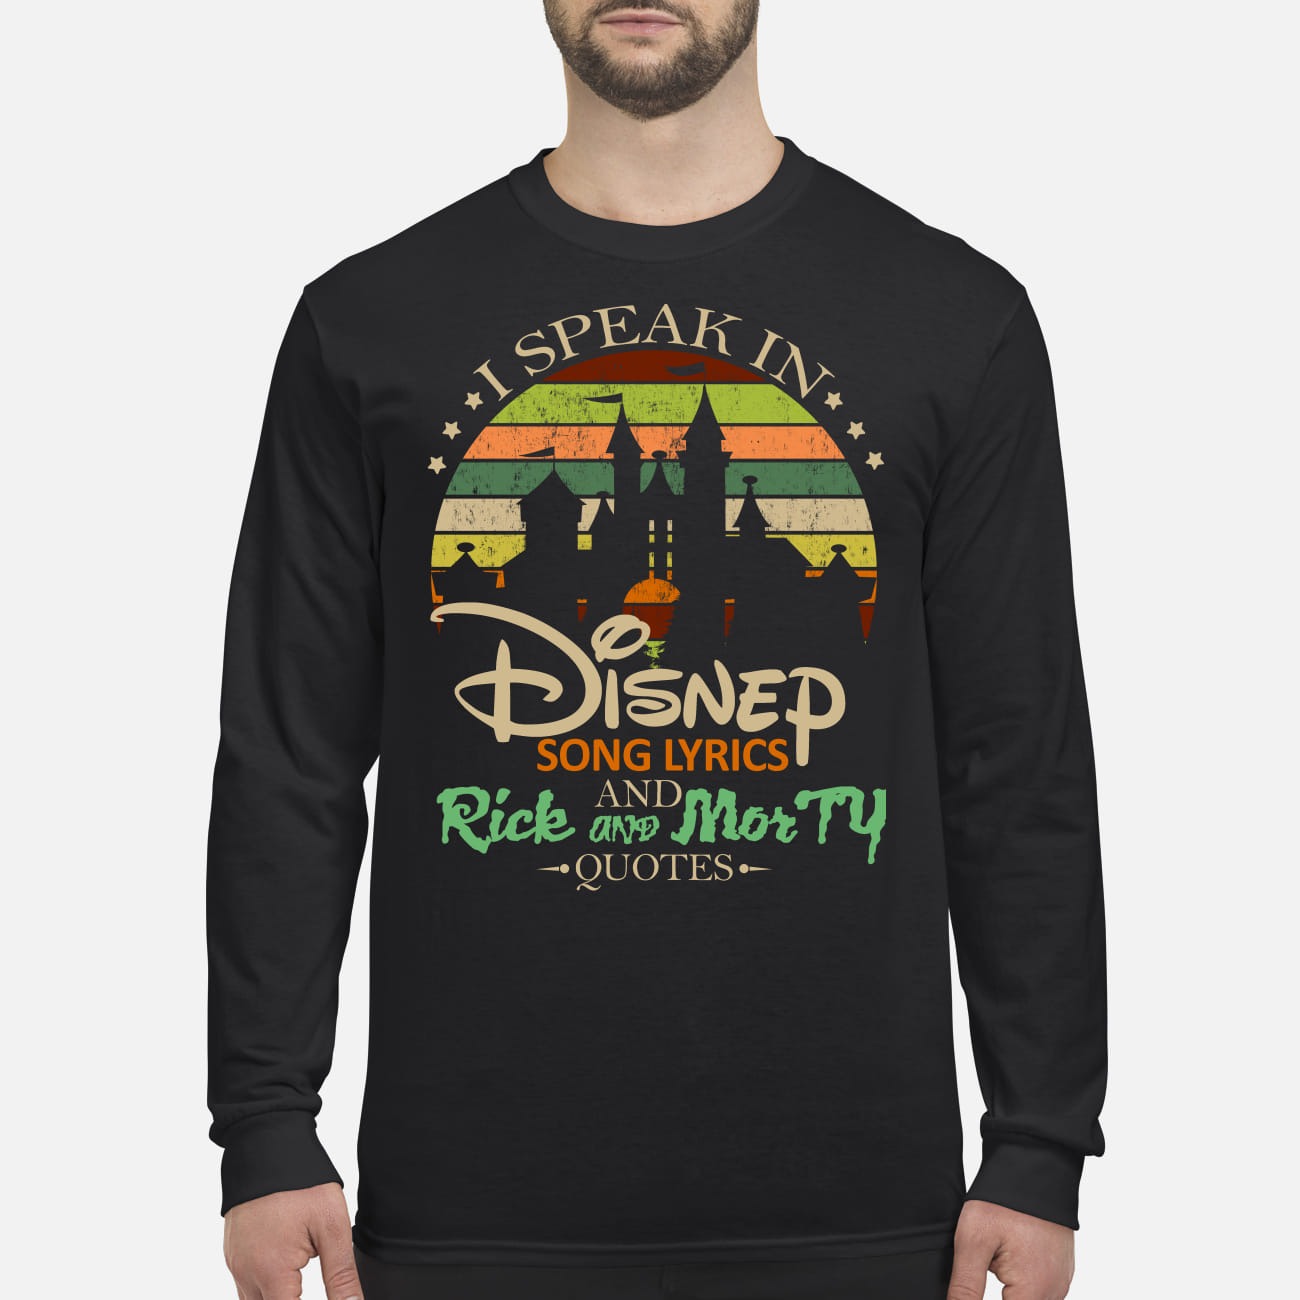 I speak in Disney song lyrics and Rick and Morty quotes men's long sleeved shirt